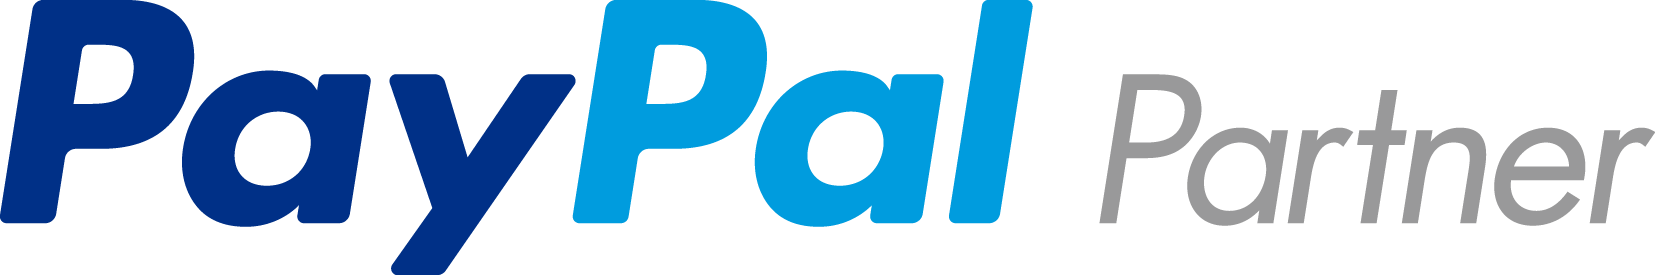 Paypal Official Partner